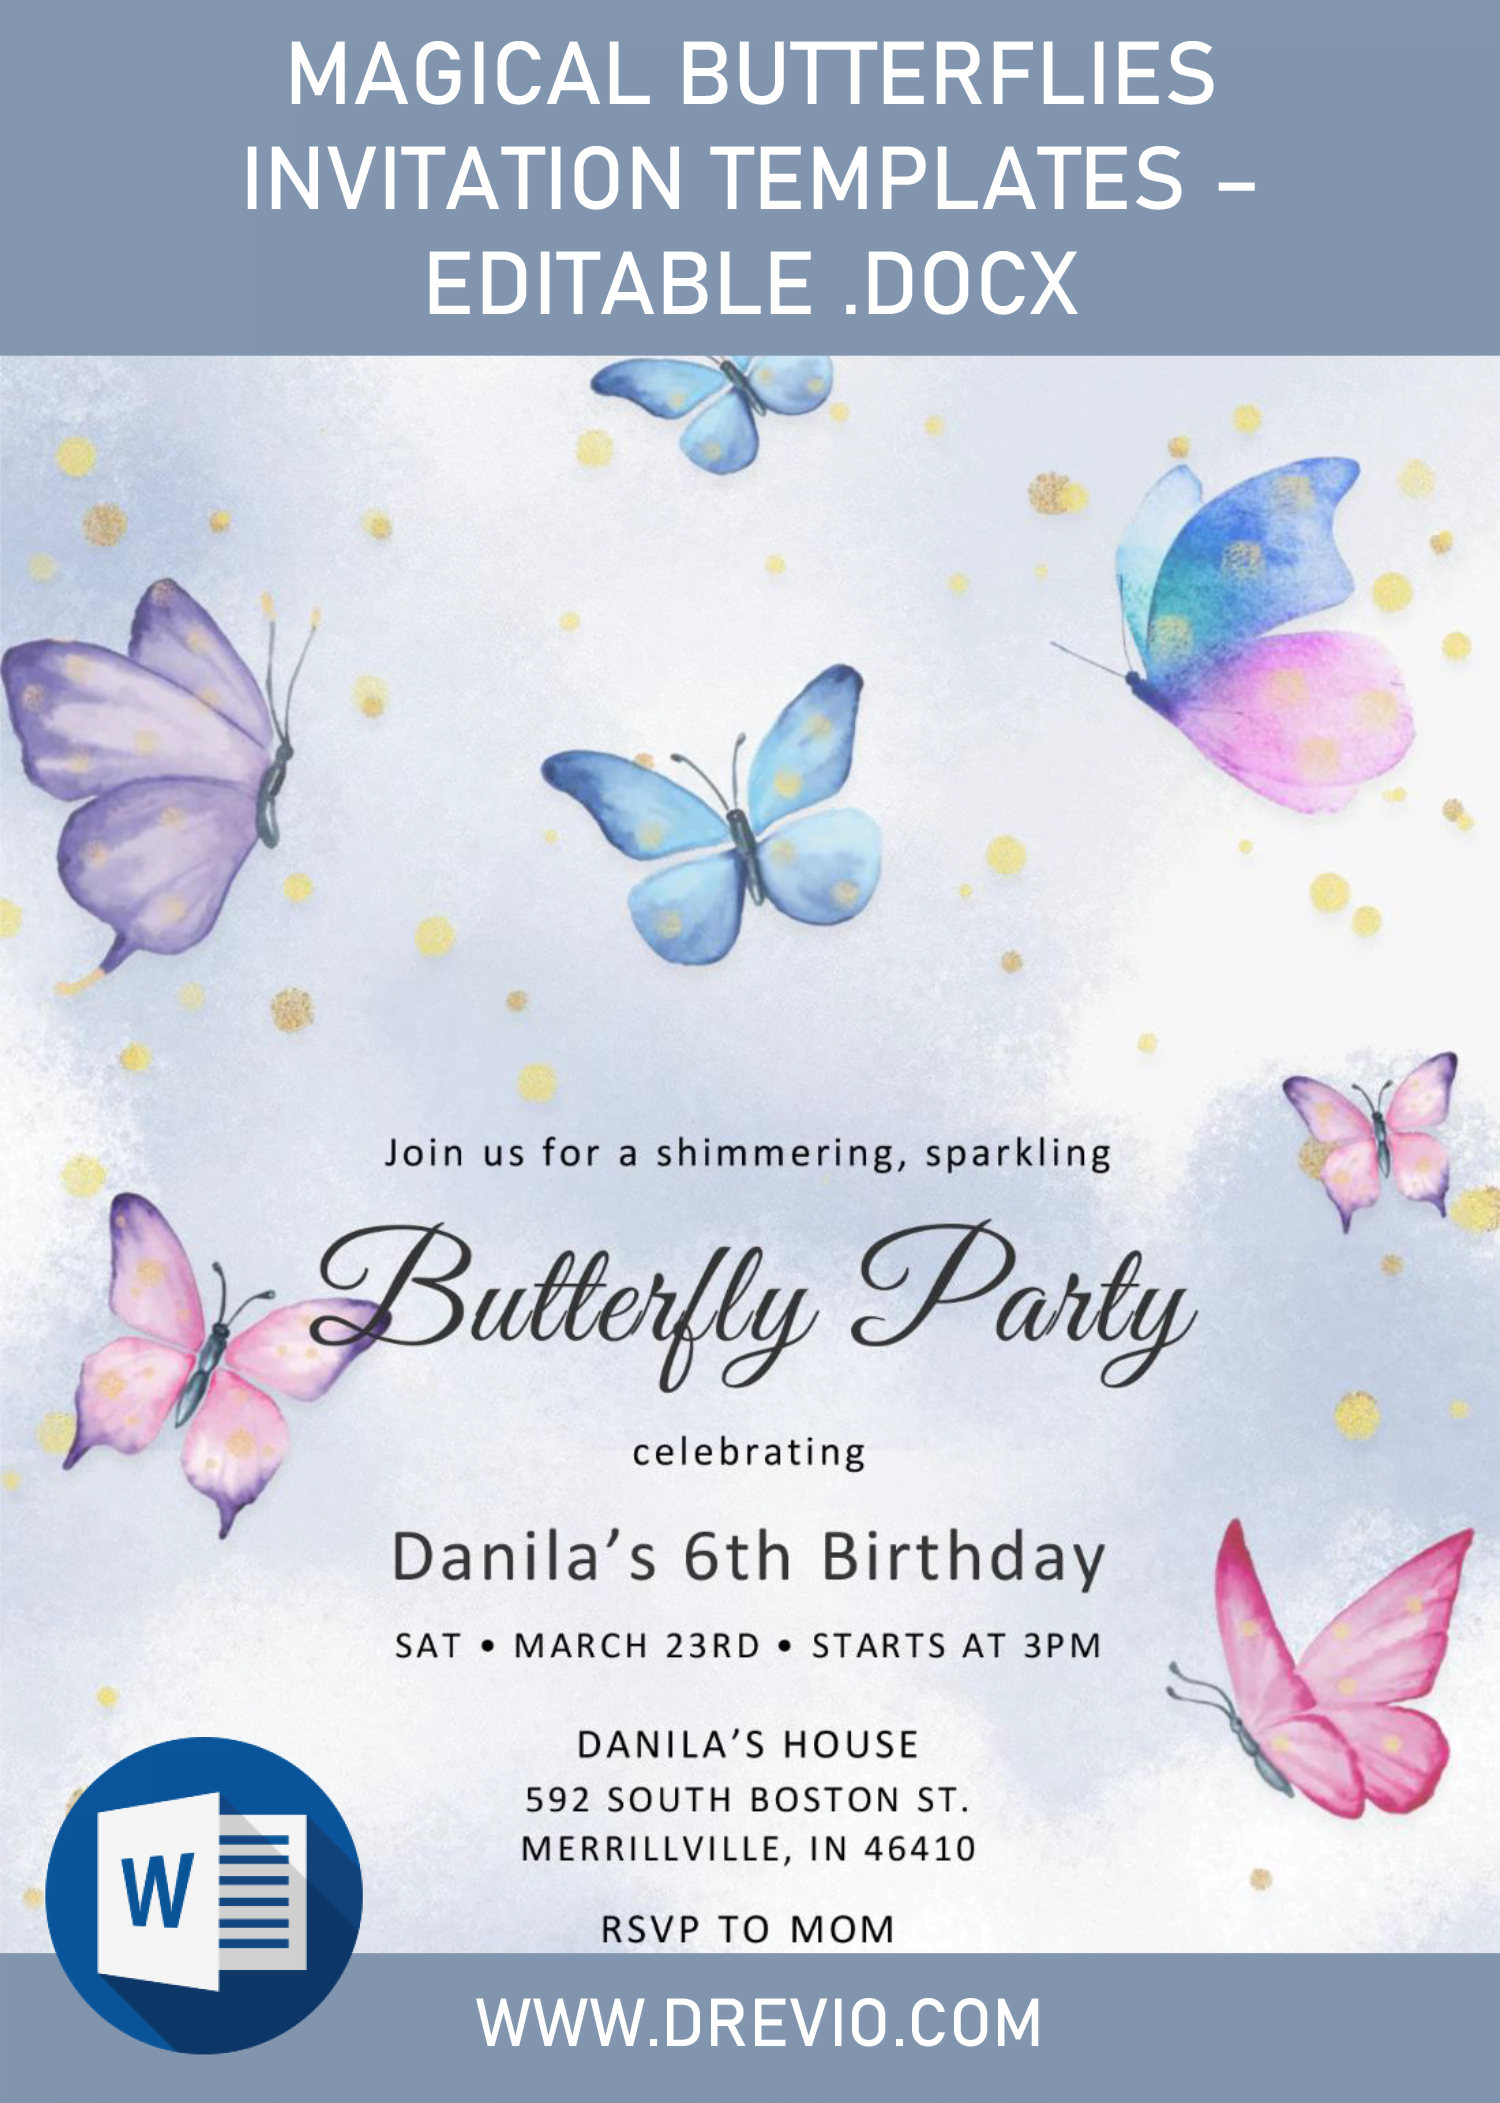 Magical Butterflies Invitation Templates – Editable .Docx For Butterfly Labels Templates